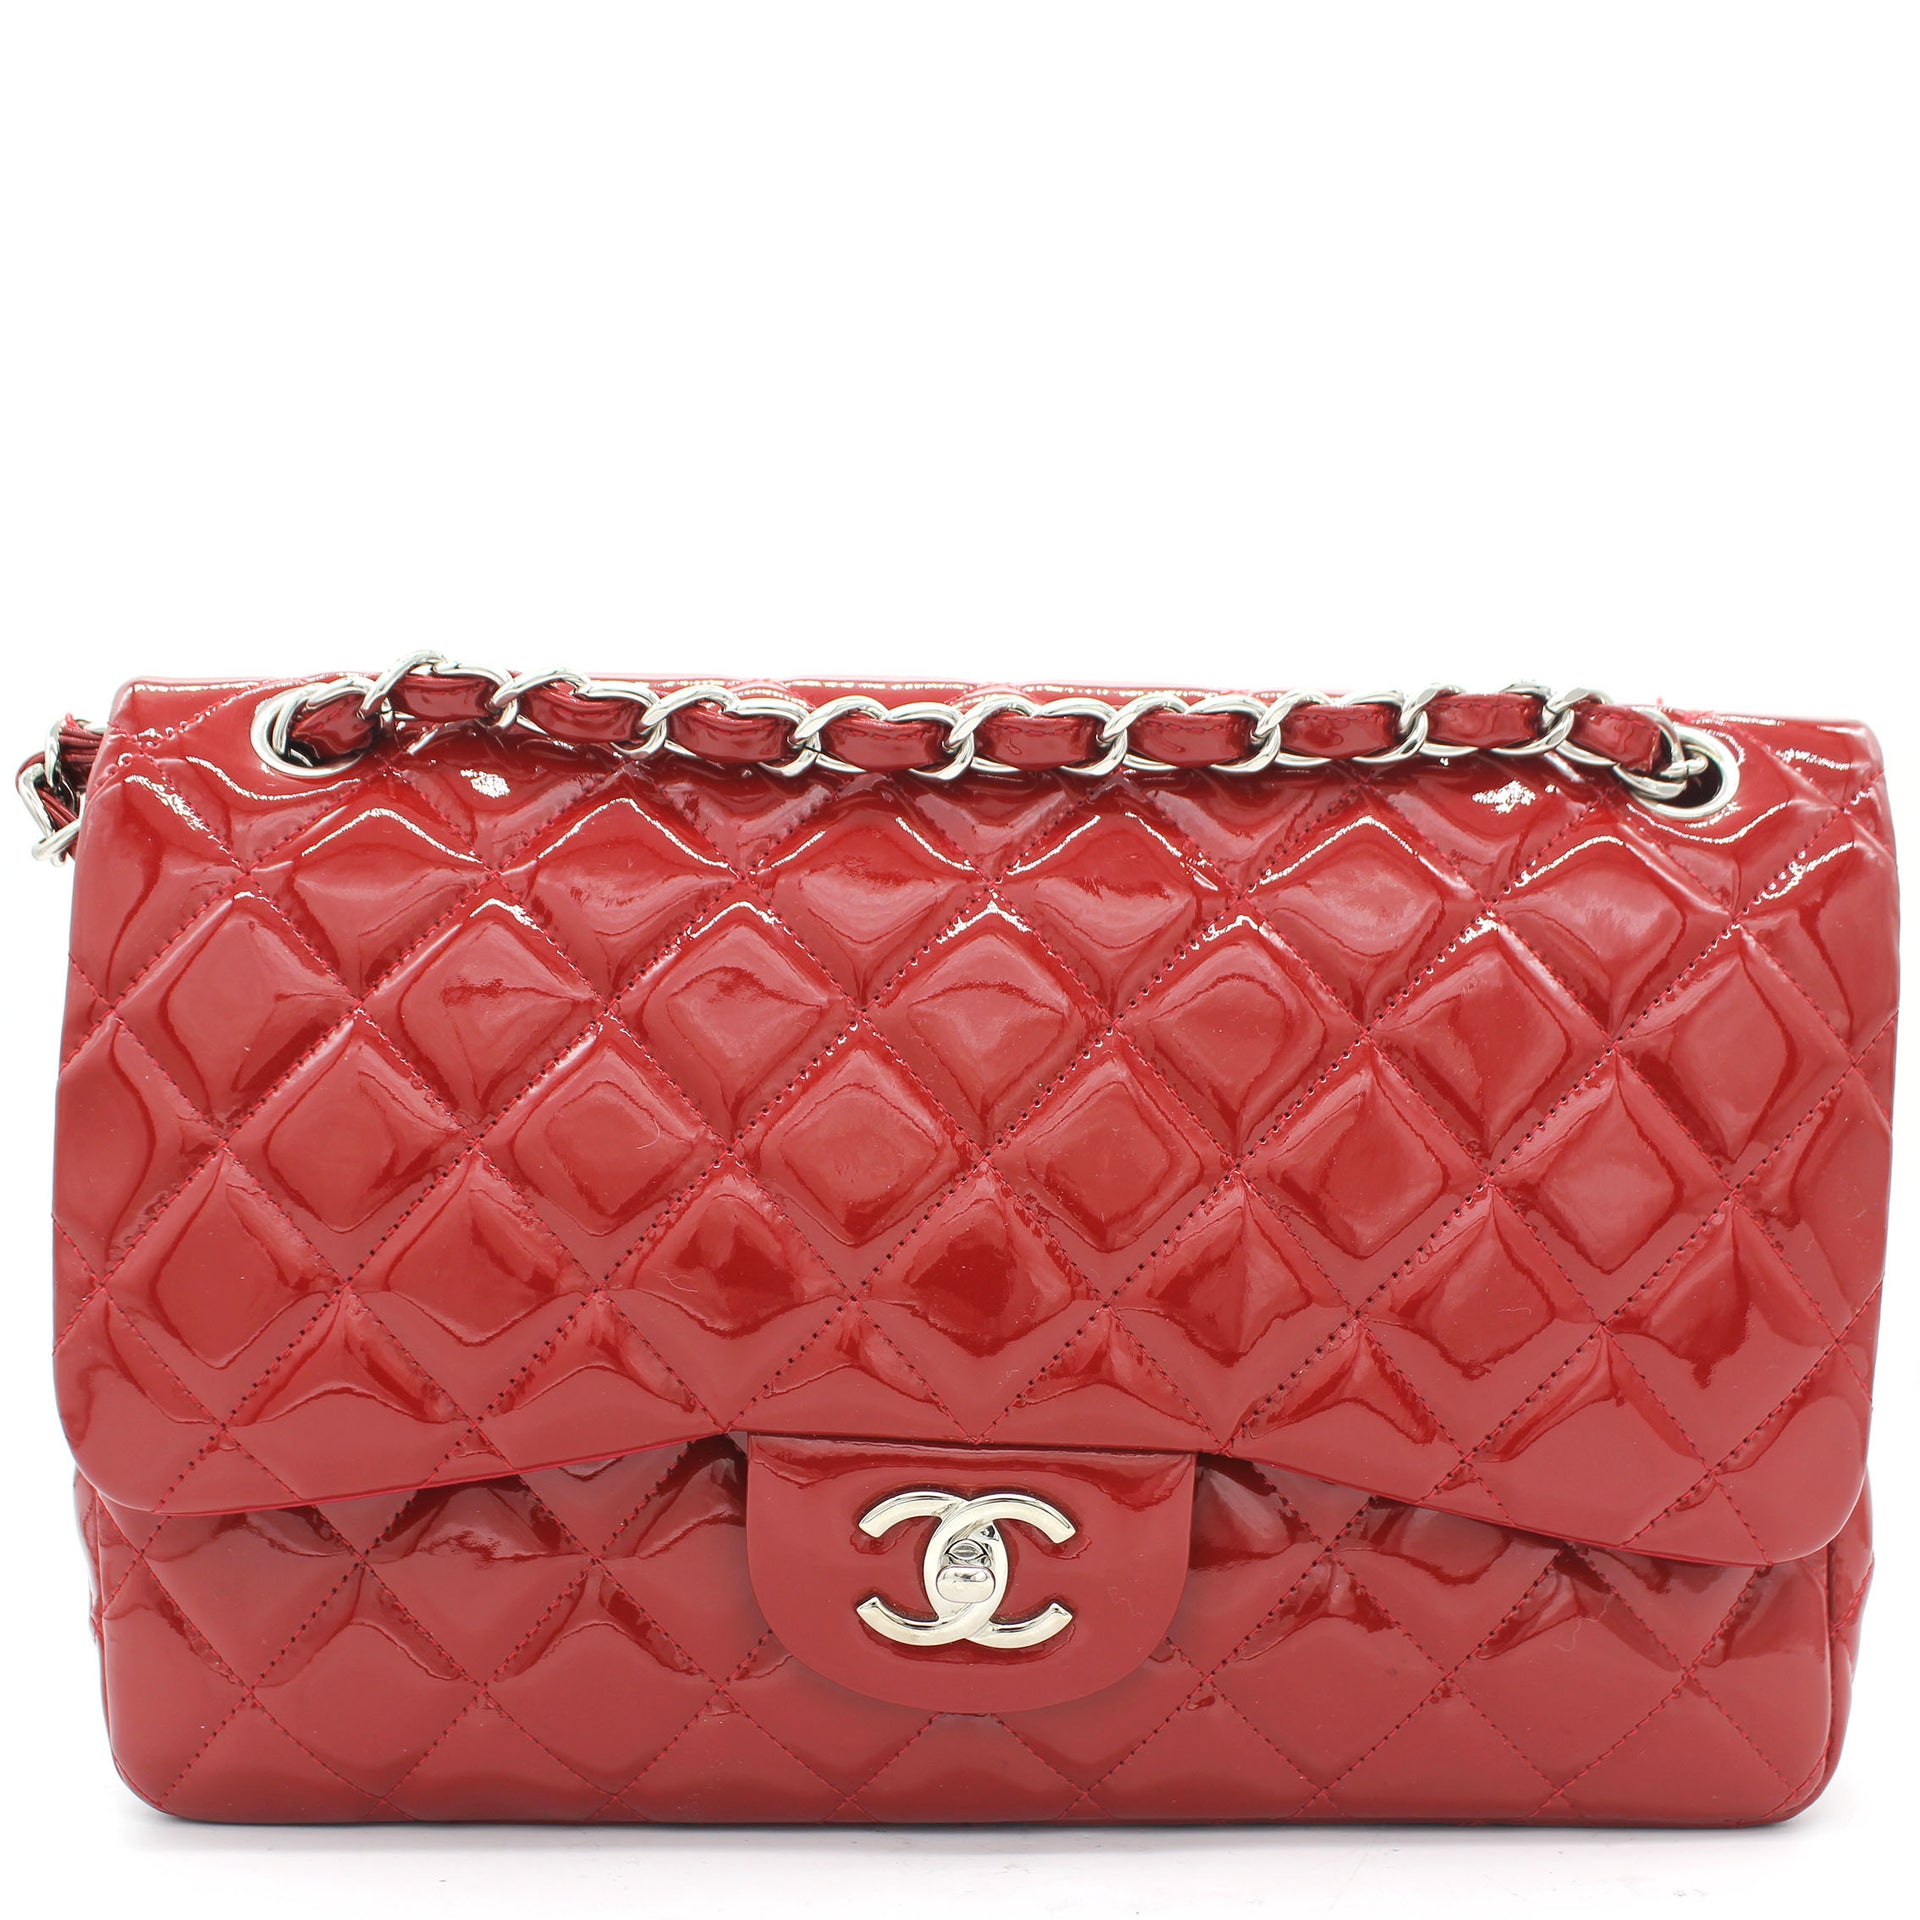 Chanel Caviar Quilted Medium Double Flap Light Beige Bag Review